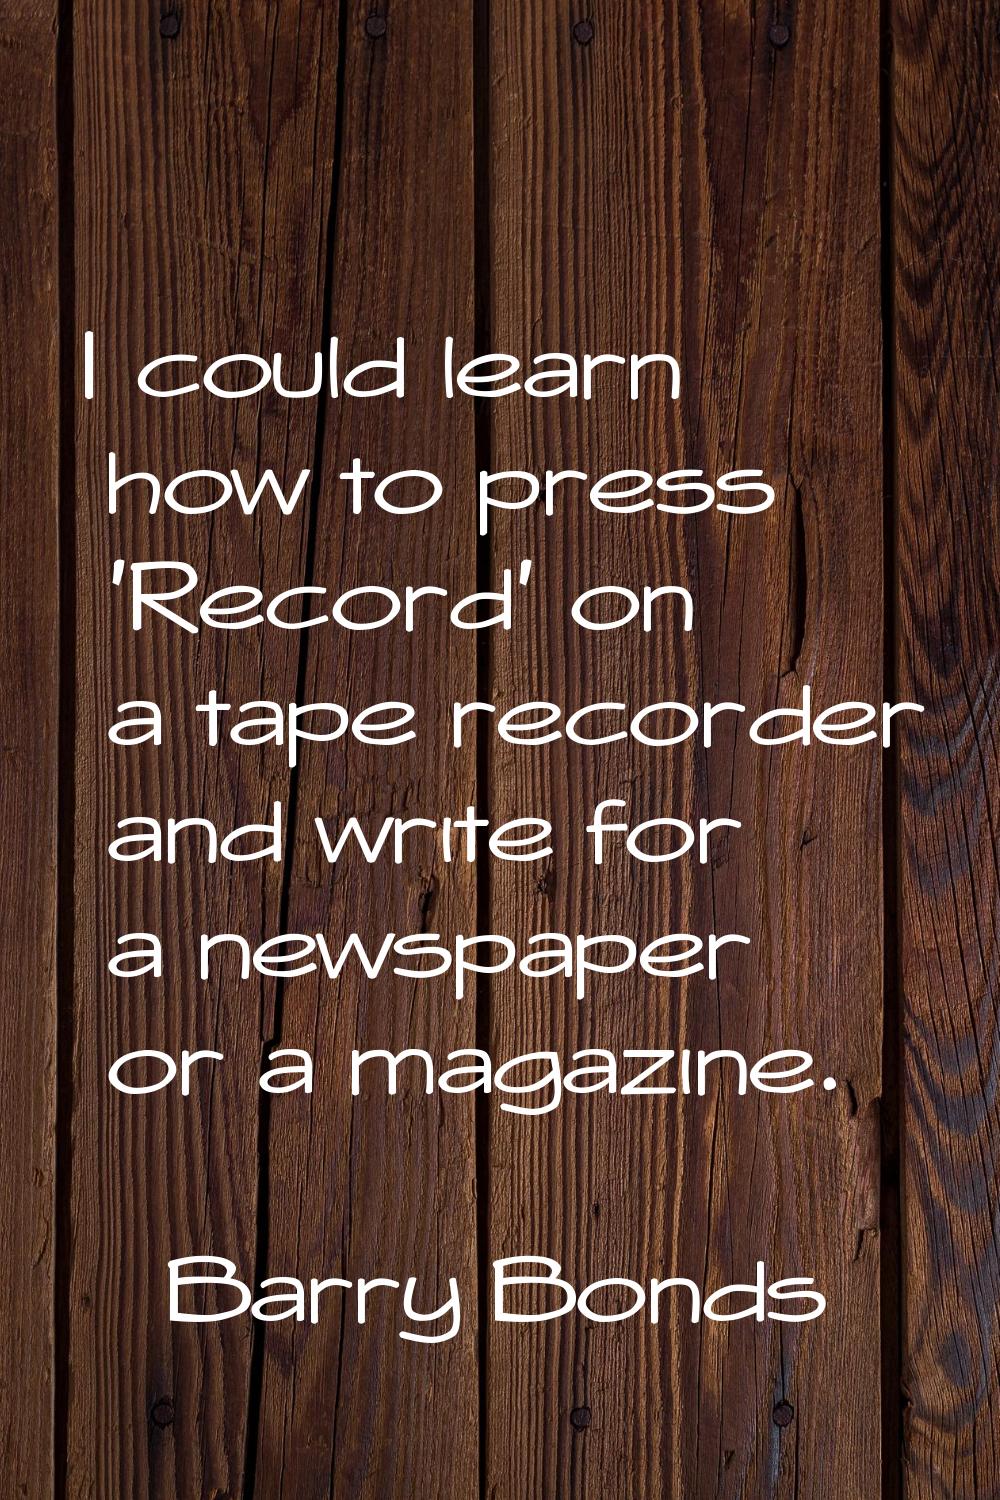 I could learn how to press 'Record' on a tape recorder and write for a newspaper or a magazine.